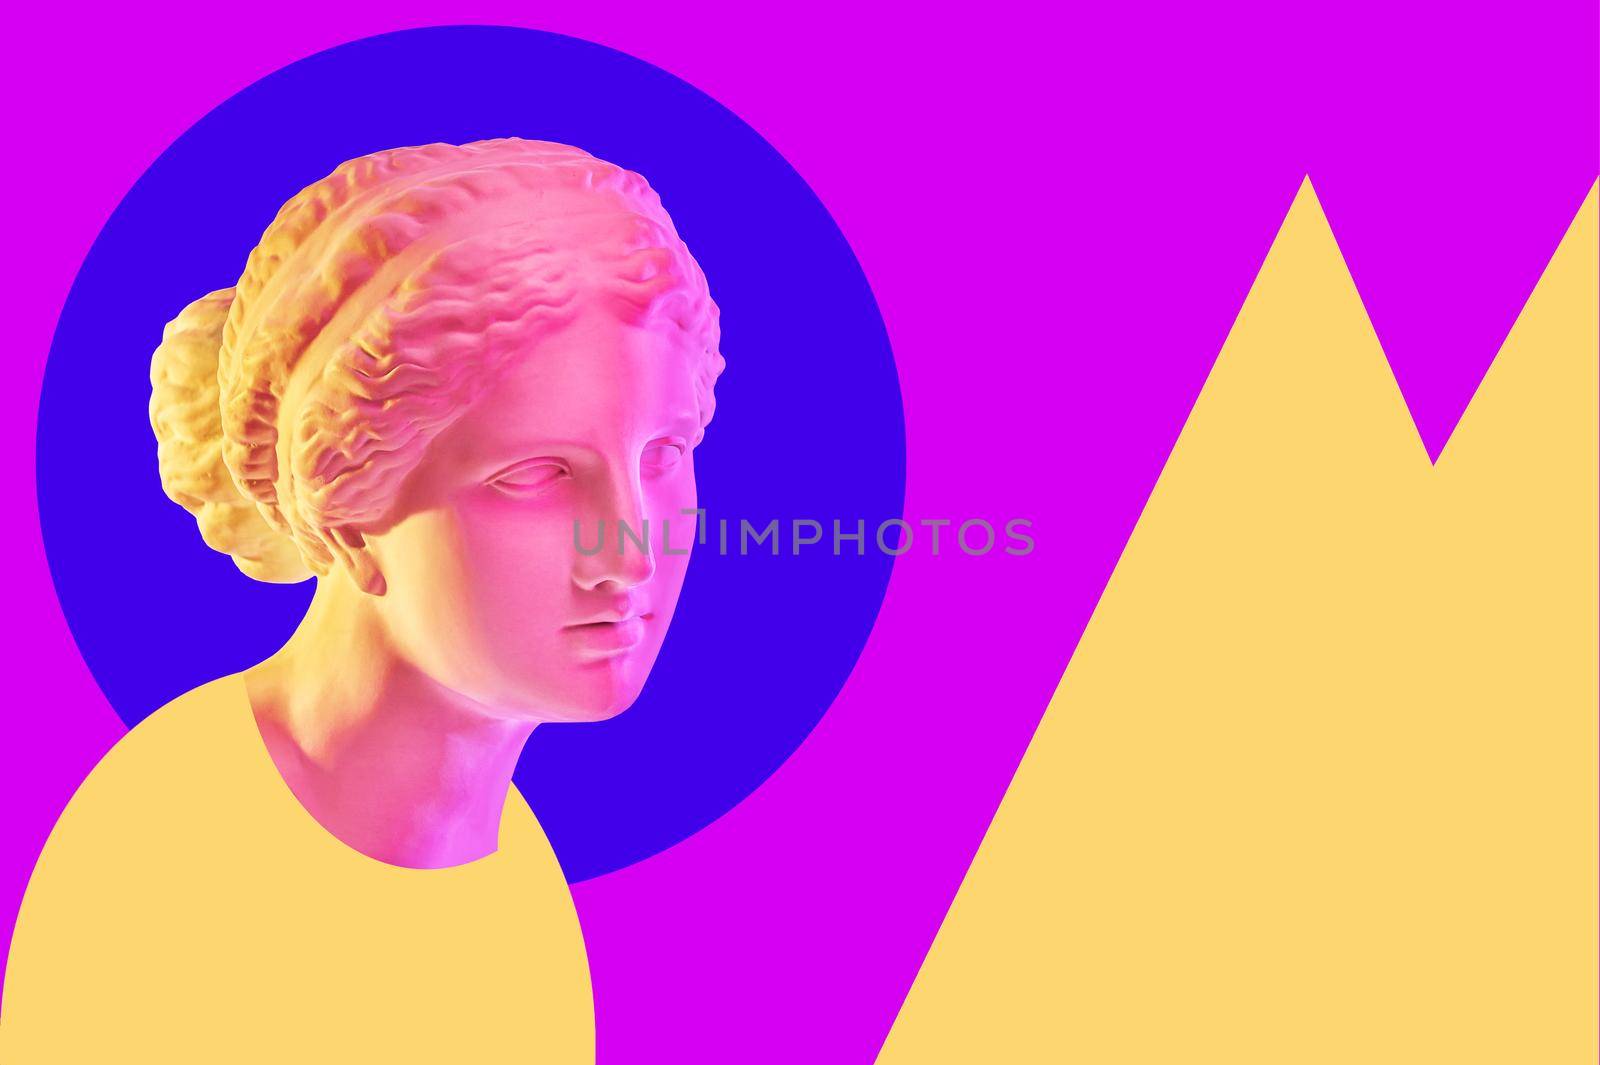 Statue of Venus de Milo. Creative concept colorful neon image with ancient greek sculpture Venus or Aphrodite head. Webpunk, vaporwave and surreal art style. Pink and yellow duotone effects. by bashta